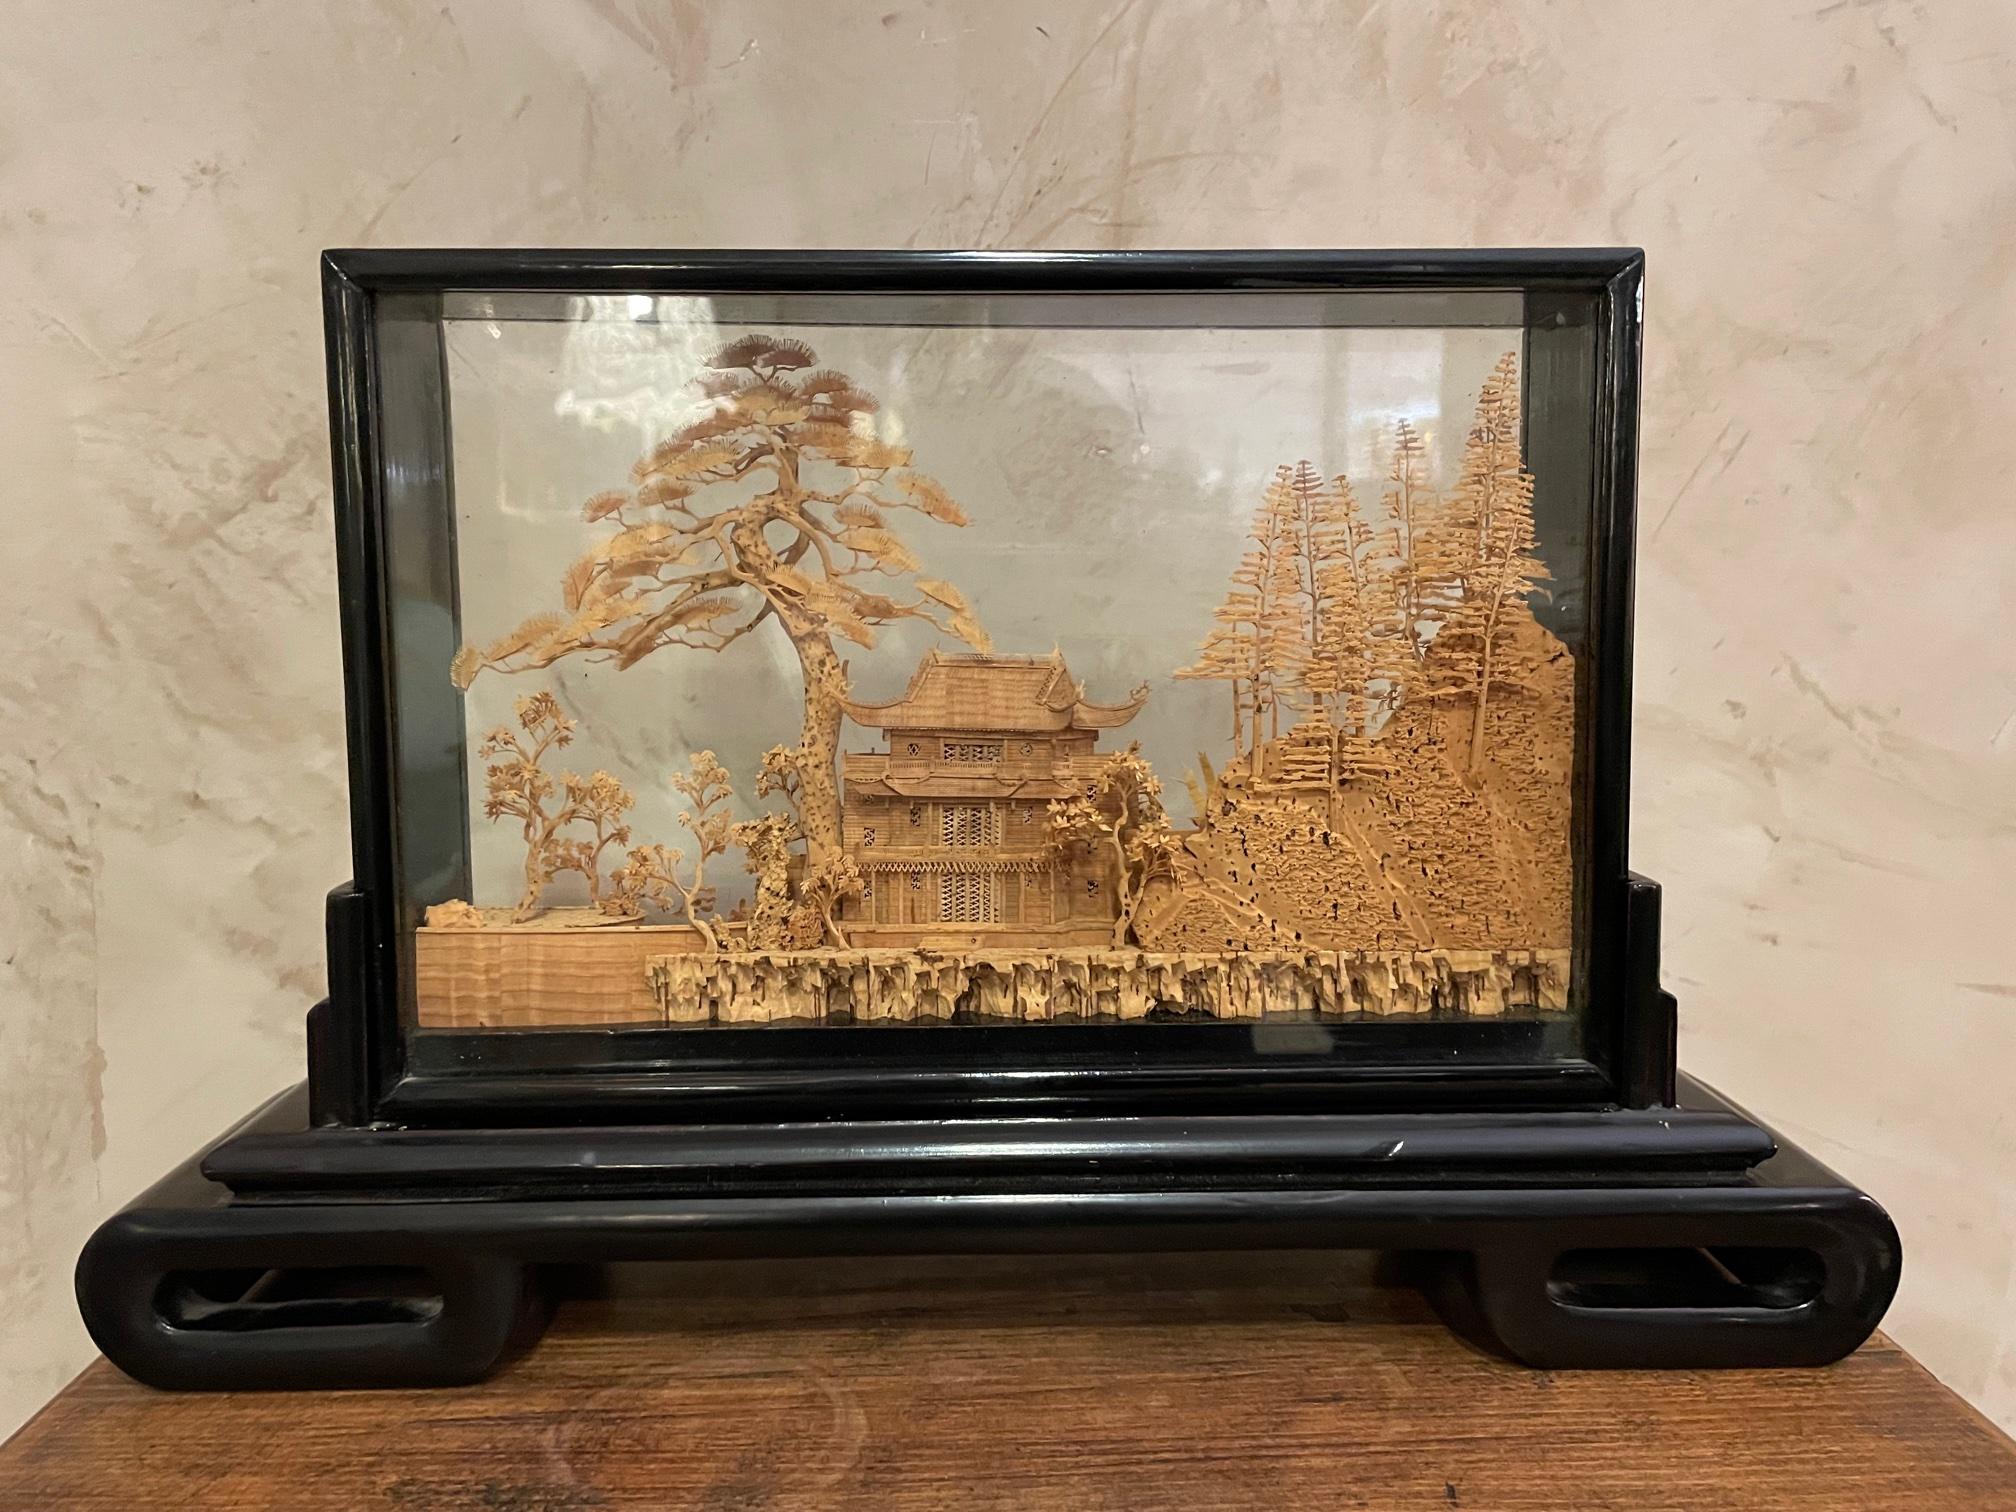 Beautiful oversized antique Chinese cork asian garden diorama from the 1940s. 
Stamp of the Chinese manufacturer. Blackened wood frame. 
Very nice quality and condition.
   